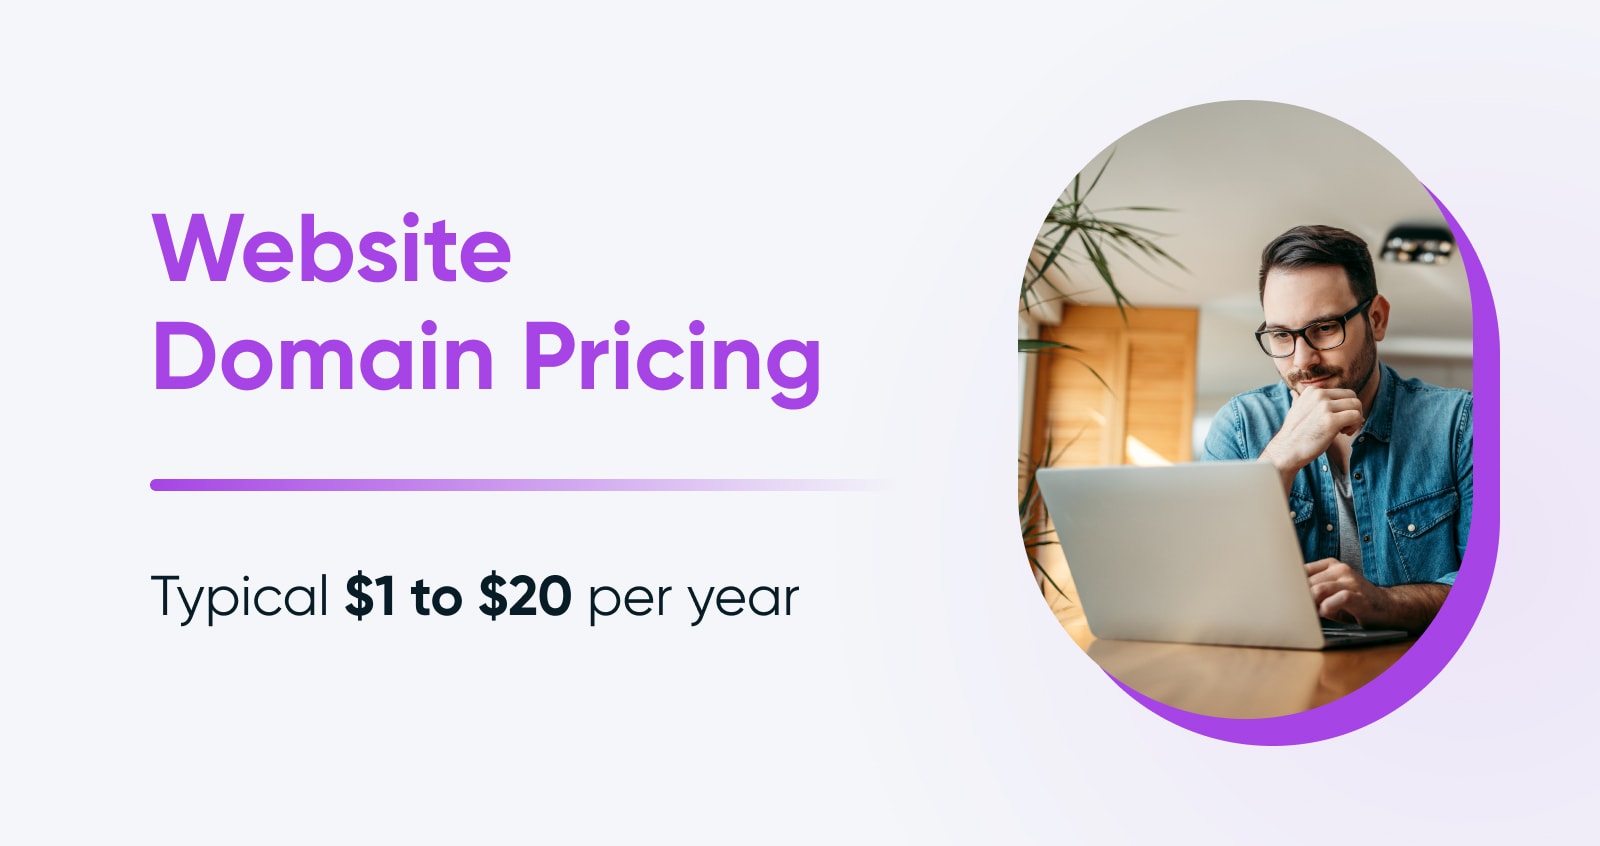 Website Domain Pricing